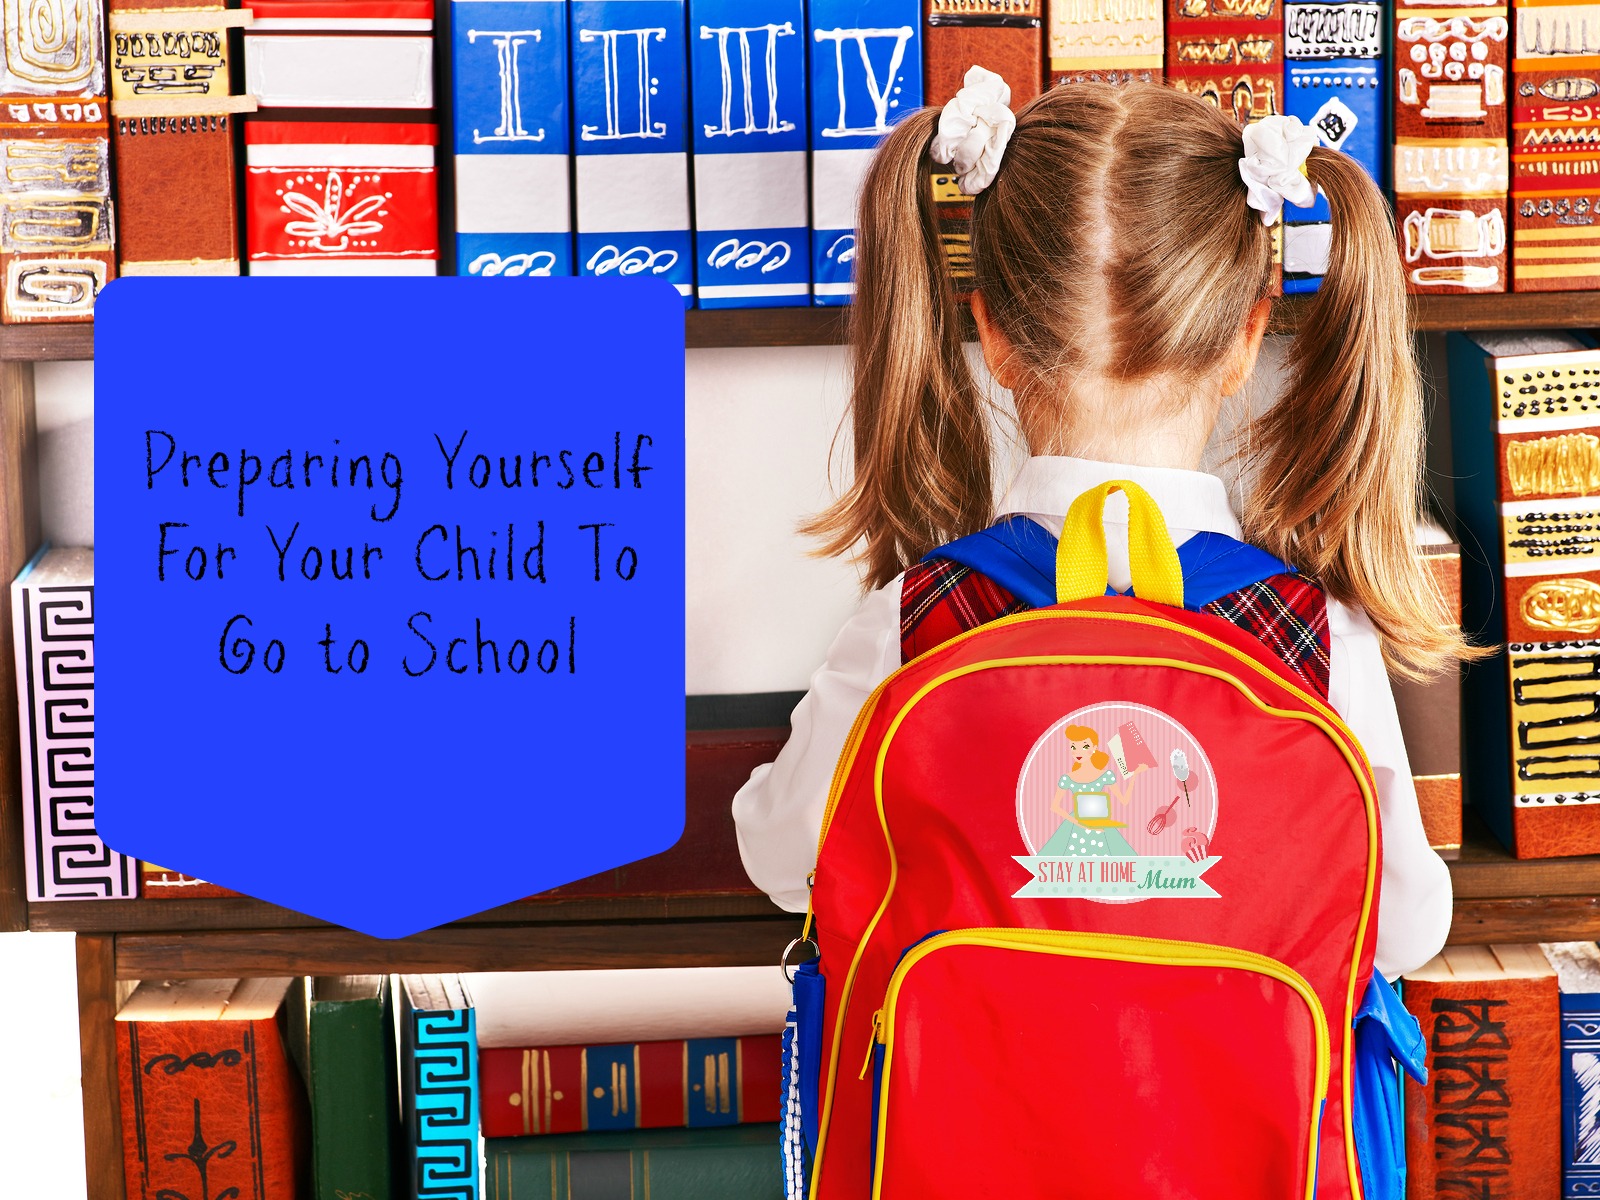 Preparing Yourself for Your Child to go to School